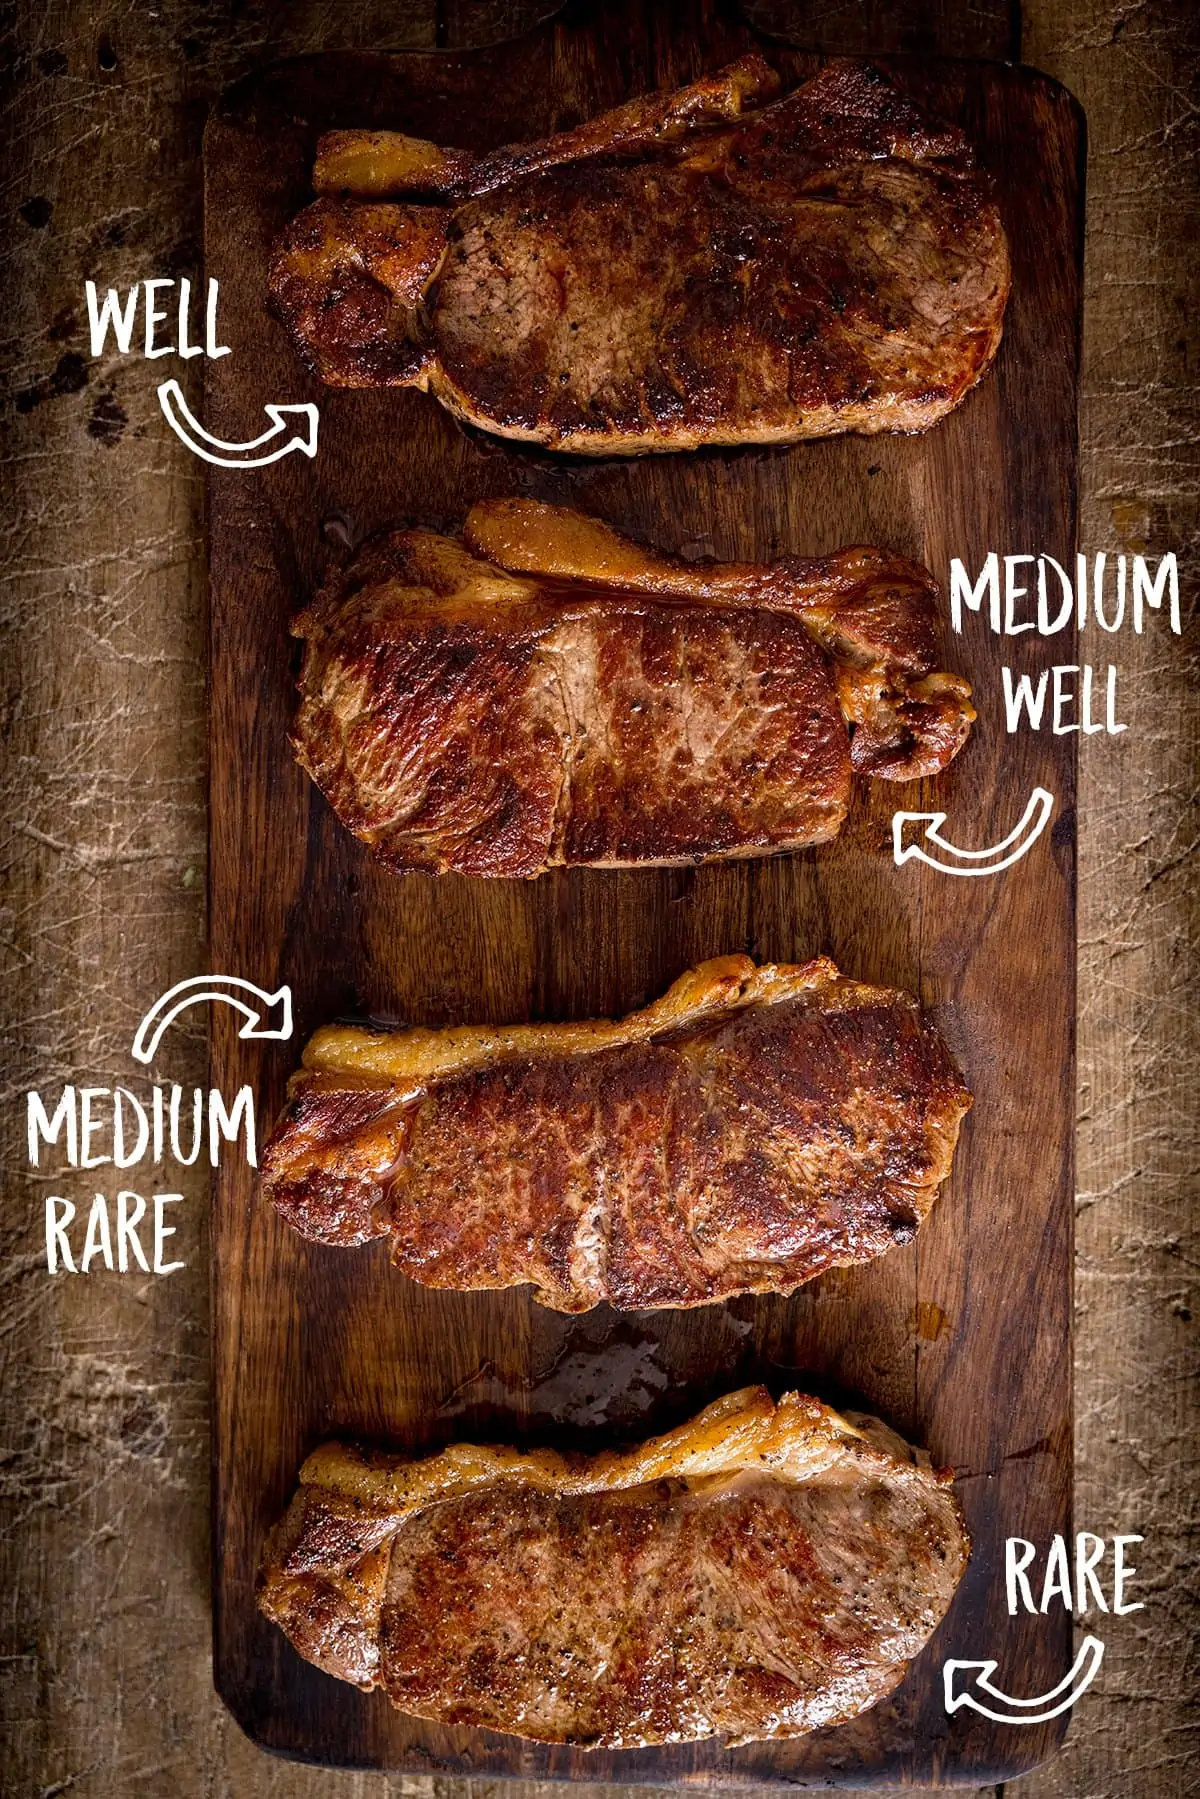 Meat Cooking Guide: Achieve Perfect Doneness Every Time